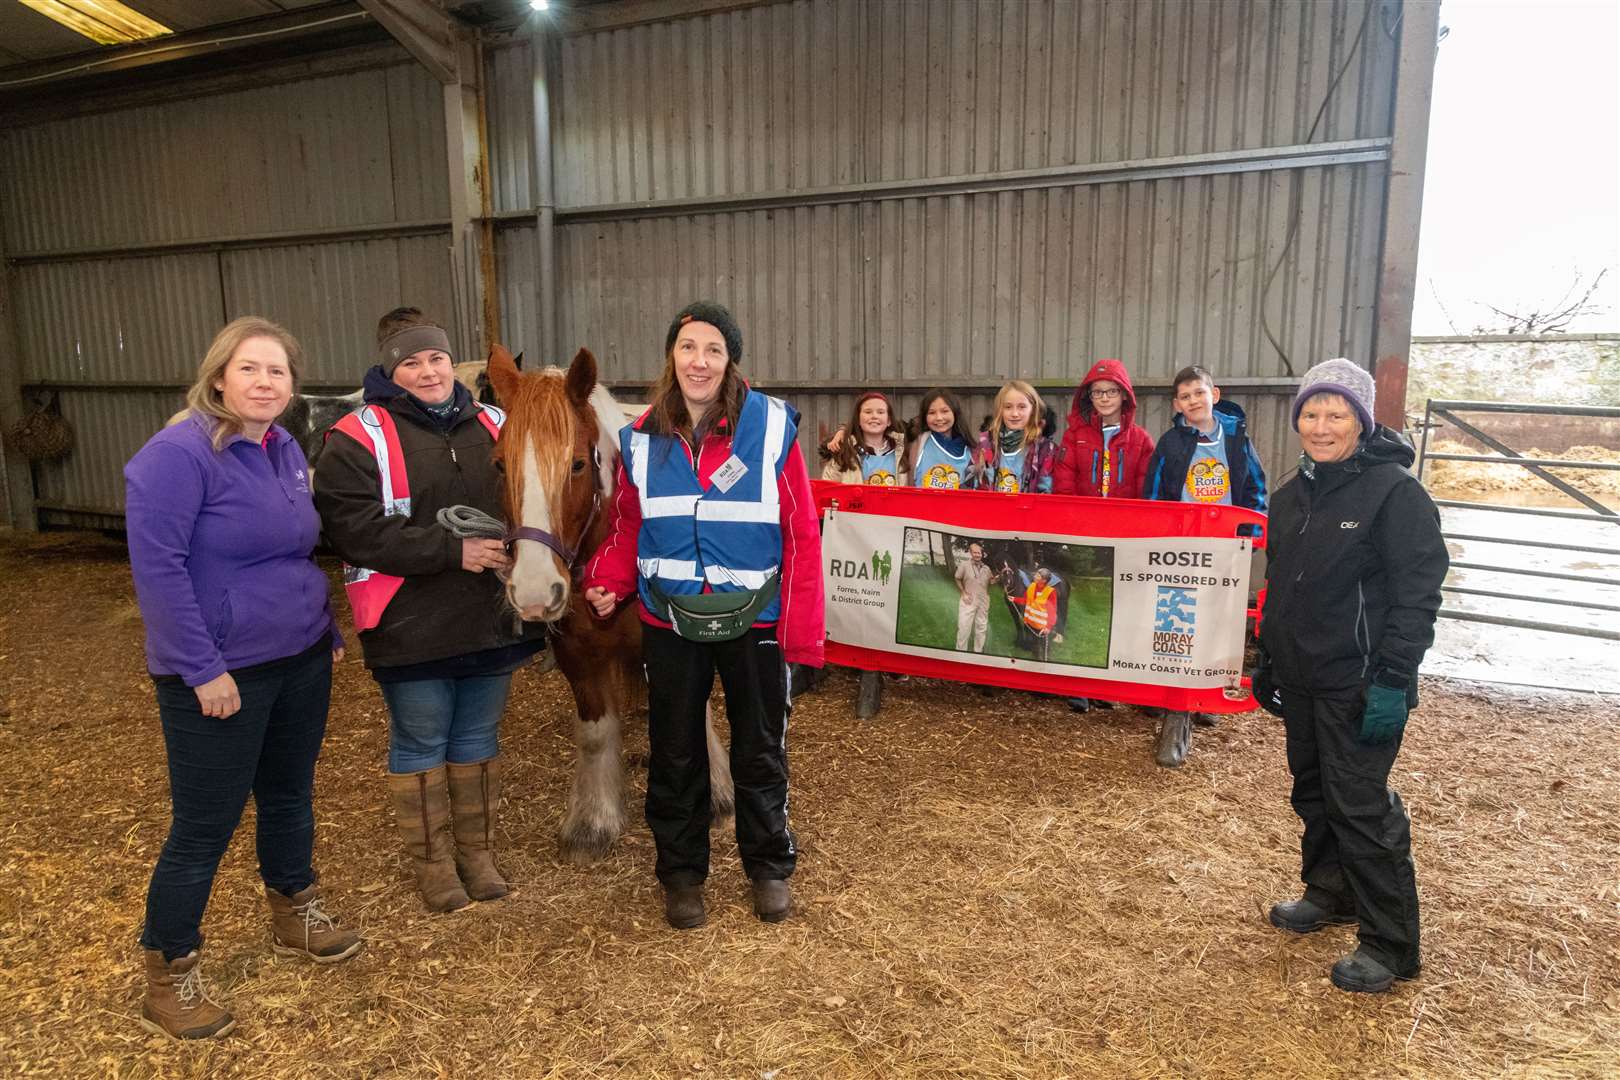 Fom left to right: Sarah Rollo, Foundation Manager, The Gordon And Ena Baxter FoundationMichelle Lucas, qualified RDA Instructor – and owner of poniesEmma Gregg, Chair, Forres Nairn & District Riding for the Disabled Elizabeth Furness, Chair, RDA Grampian & Highland Region with Mosstowie Primary School Rotakids who have chosen RDA as their local charity of the year.